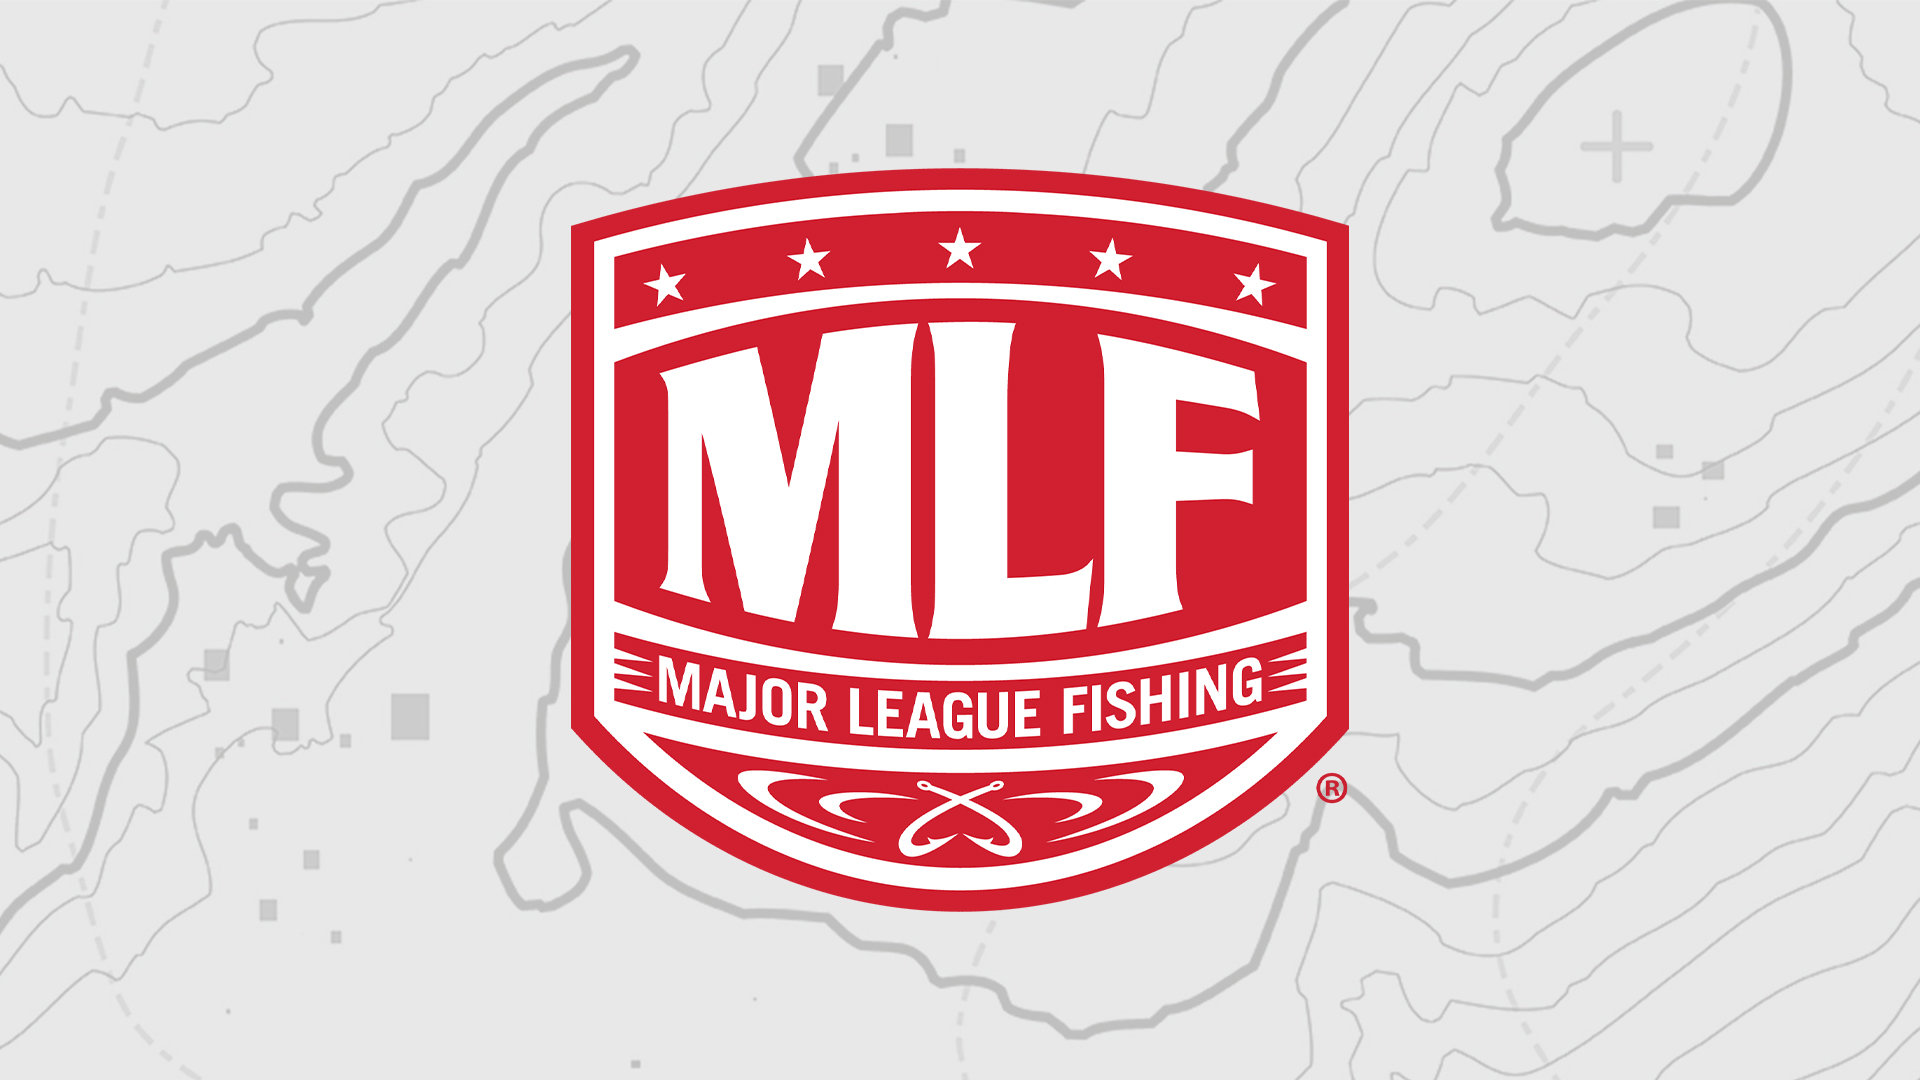 Two for One - Major League Fishing